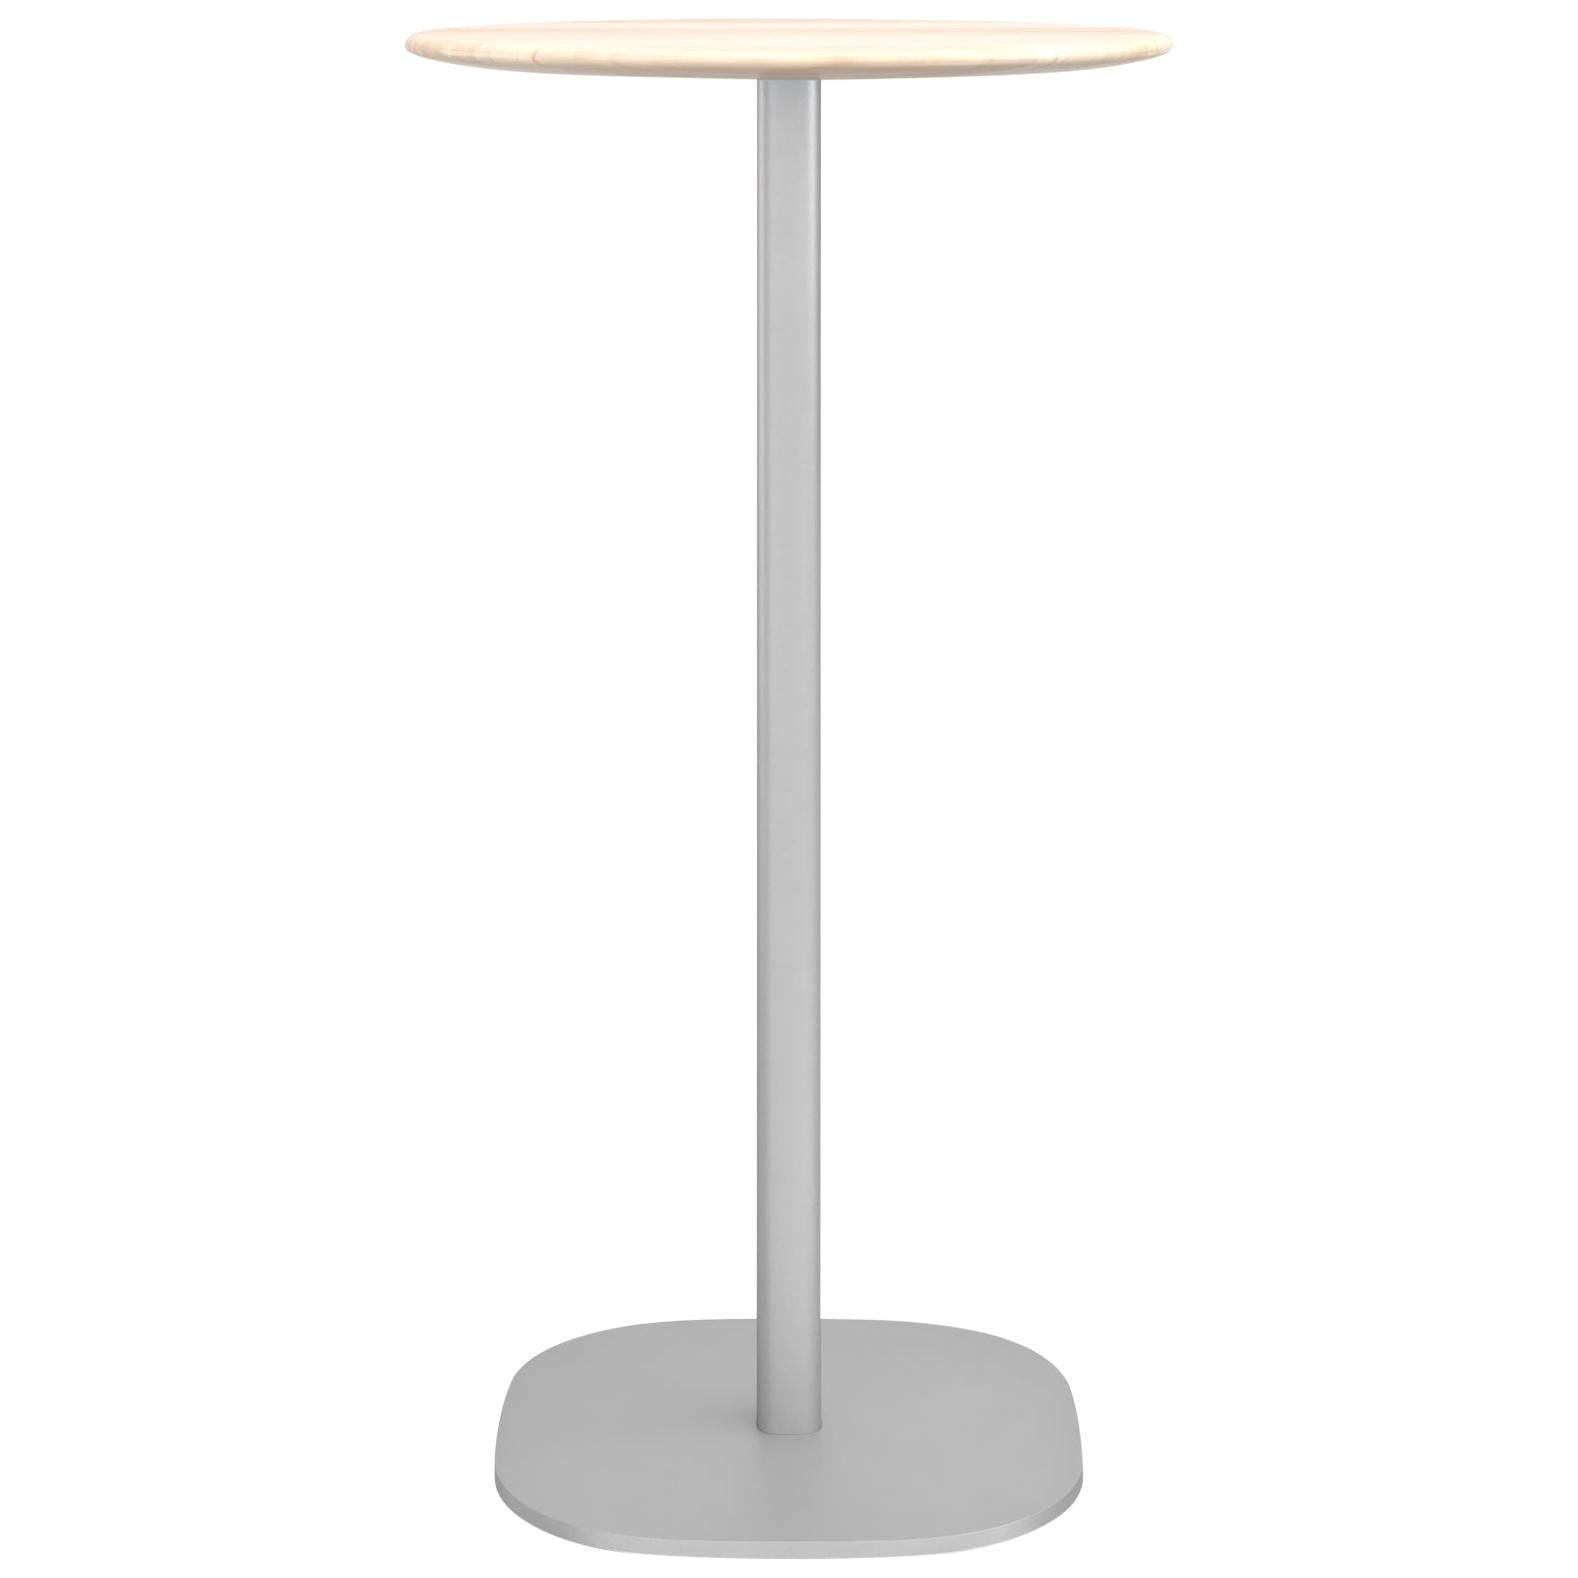 Emeco 2 Inch Small Aluminum Round Bar Table with Wood Top by Jasper Morrison For Sale